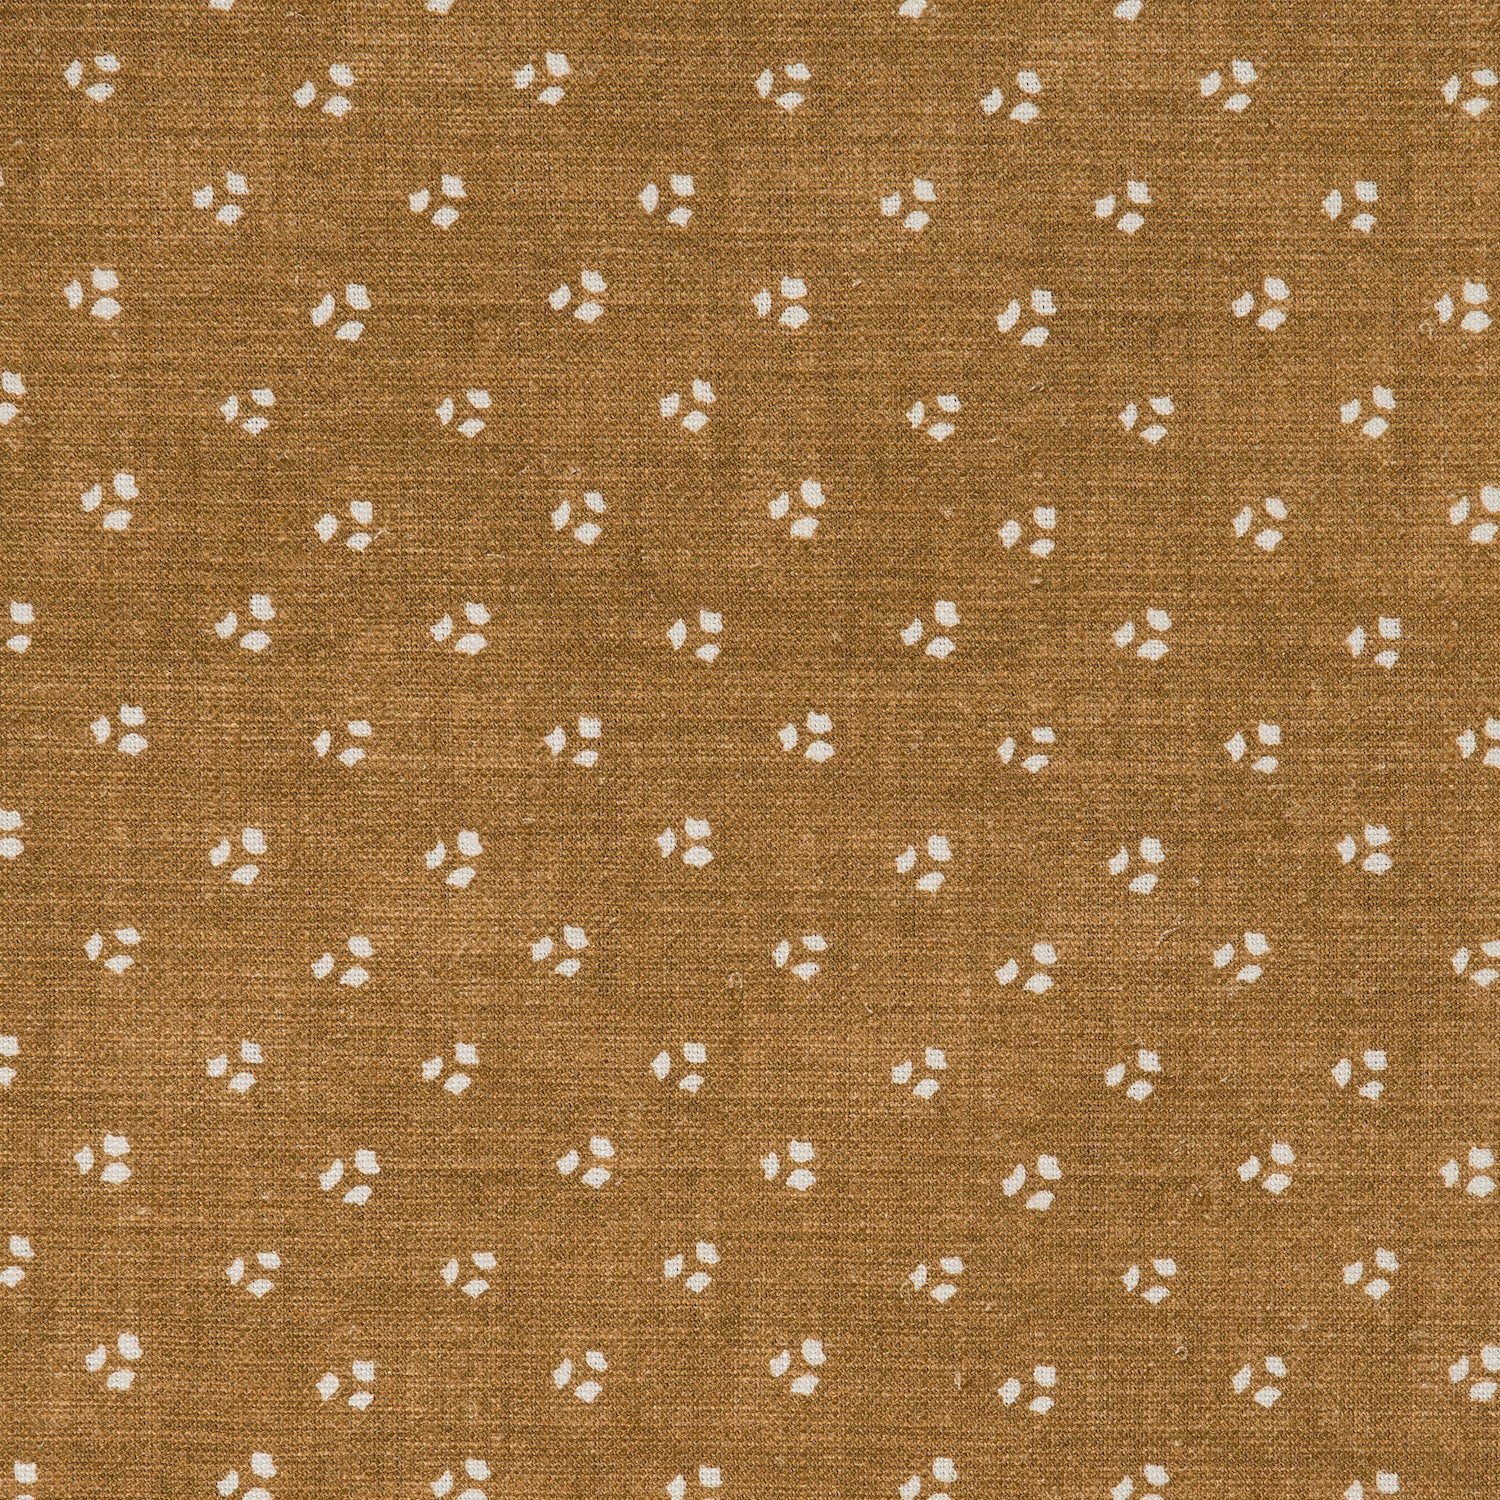 Detail of a linen fabric in a clustered dot pattern in cream on a camel field.